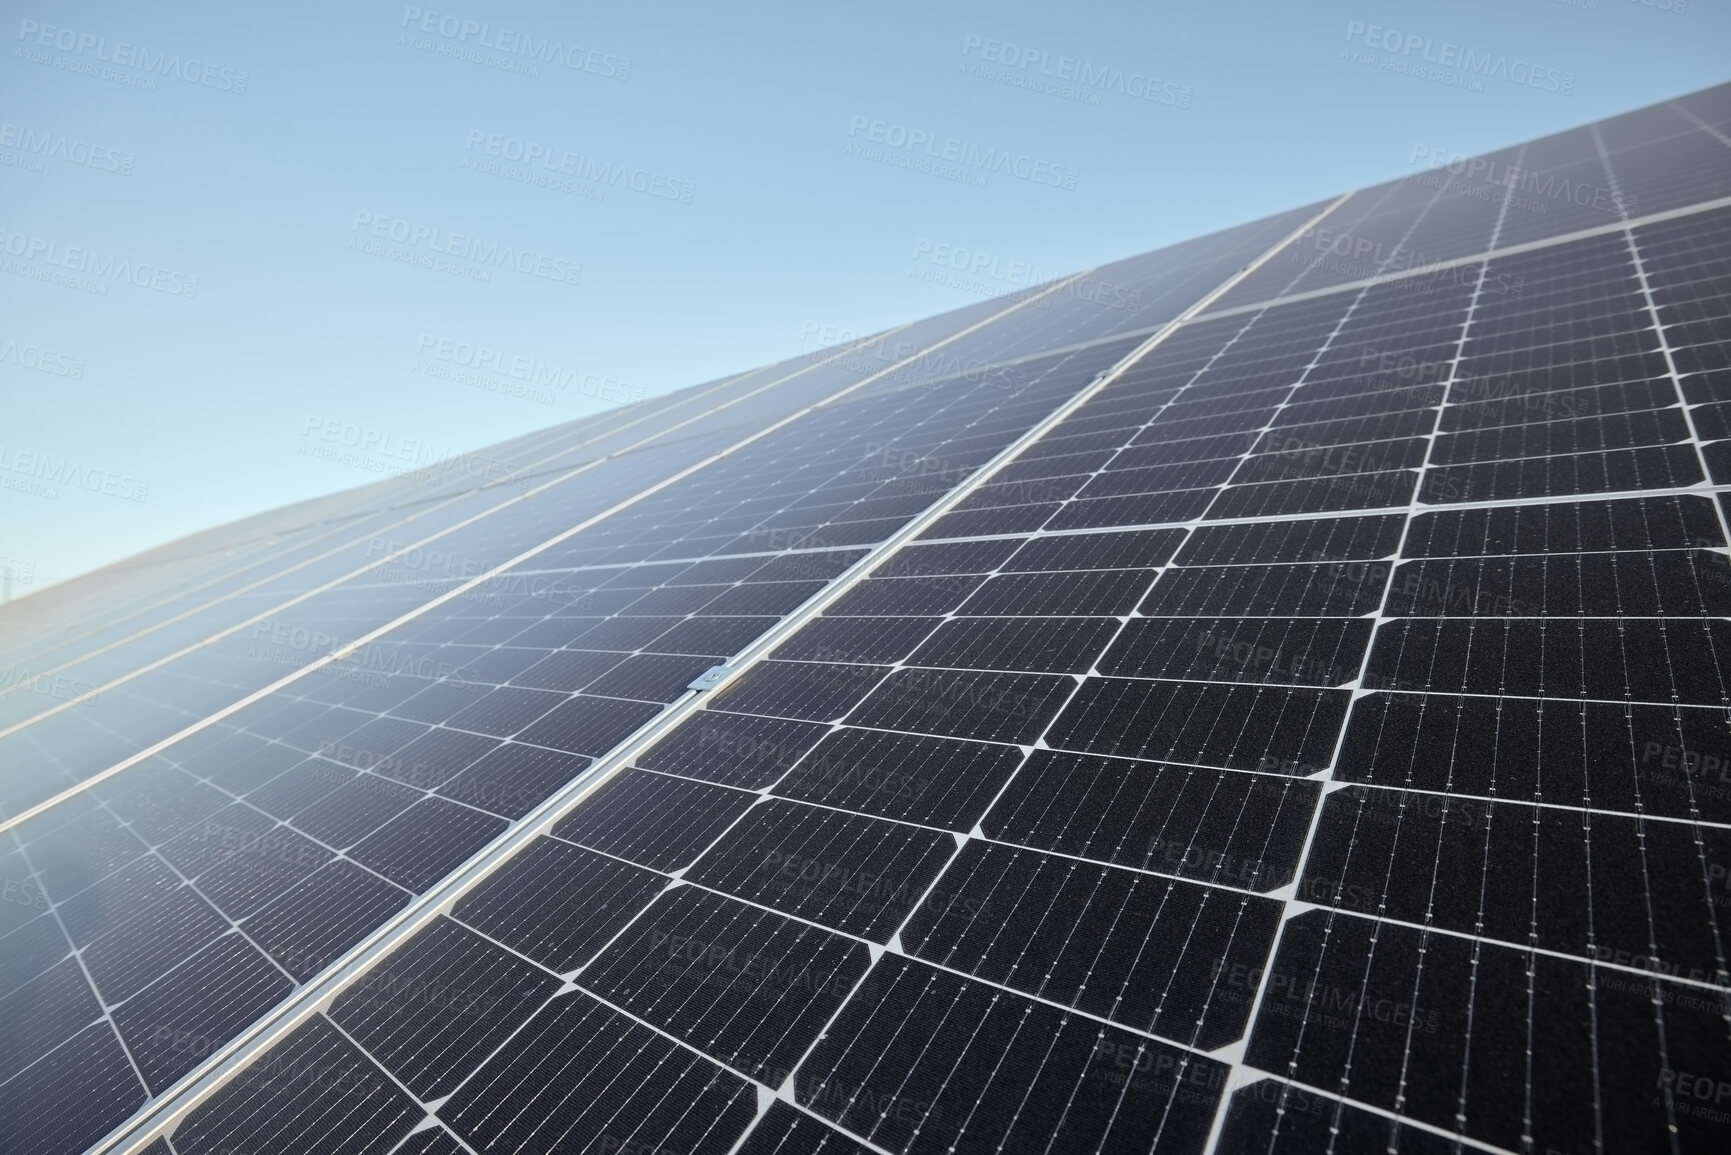 Buy stock photo Renewable, clean and green energy with solar panels for future eco electricity from the sun against a blue sky mockup. Photovoltaic power system converting sunlight through cells for sustainability